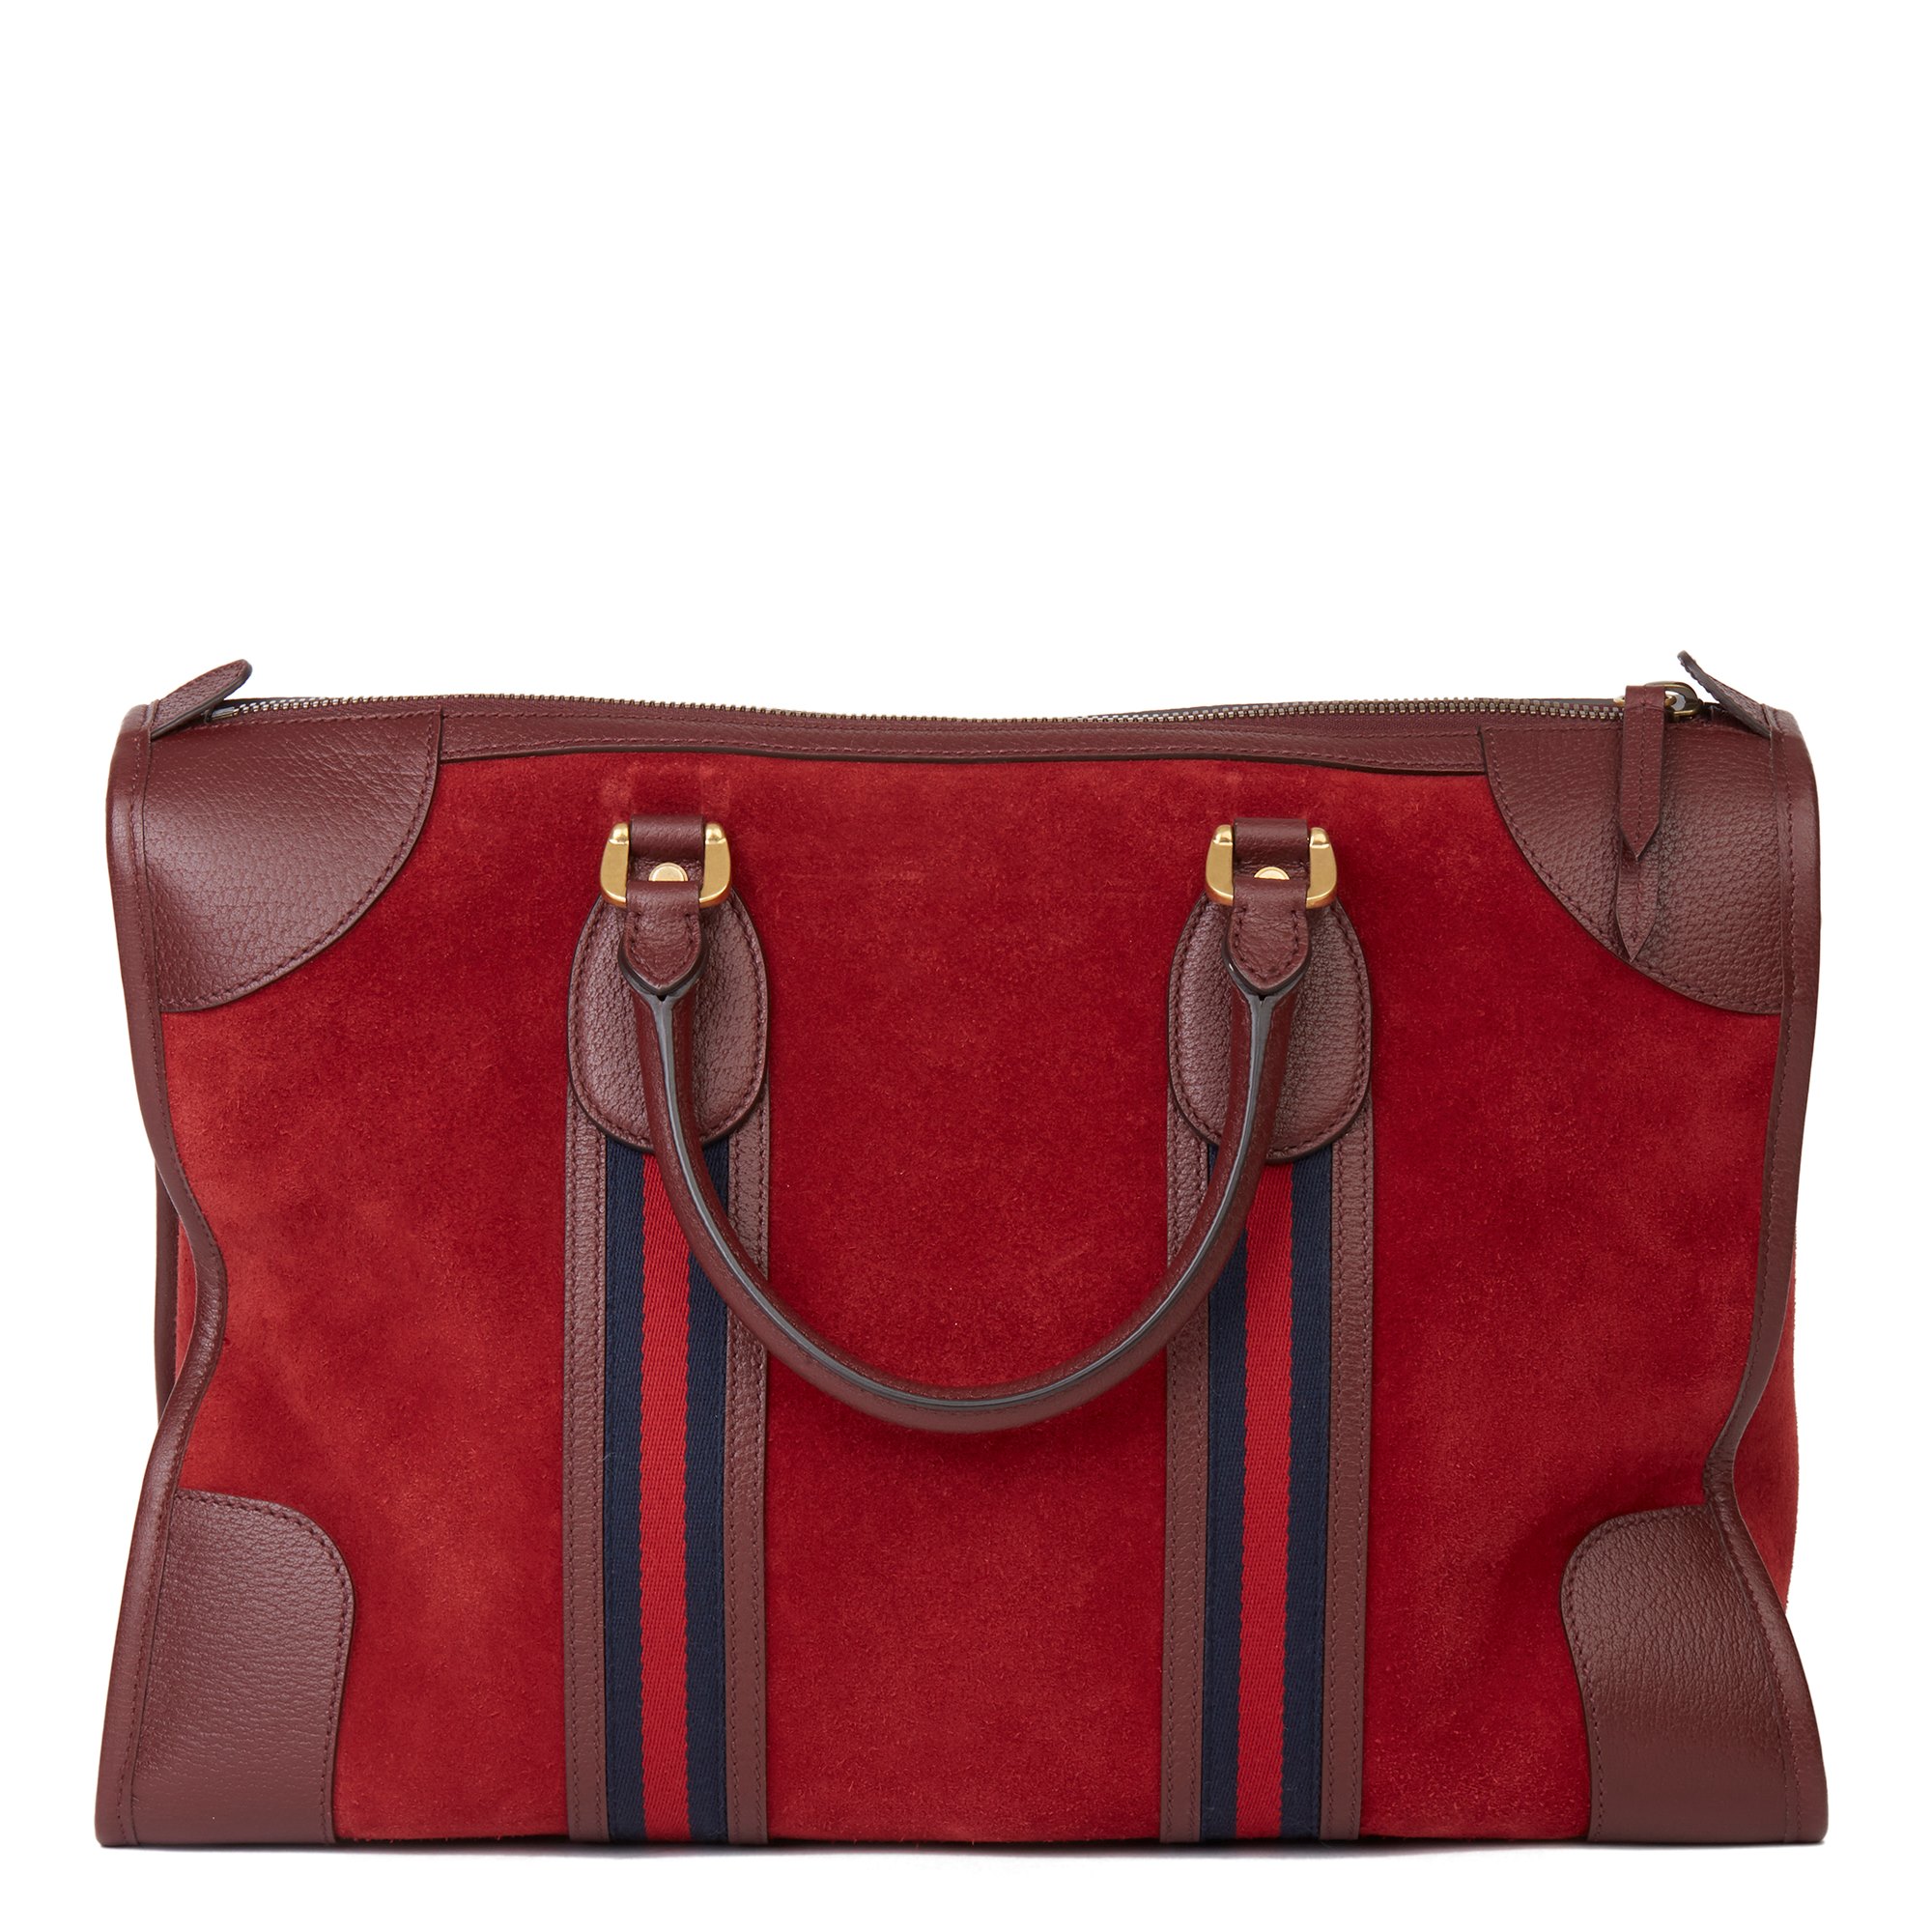 gucci red leather duffle bag